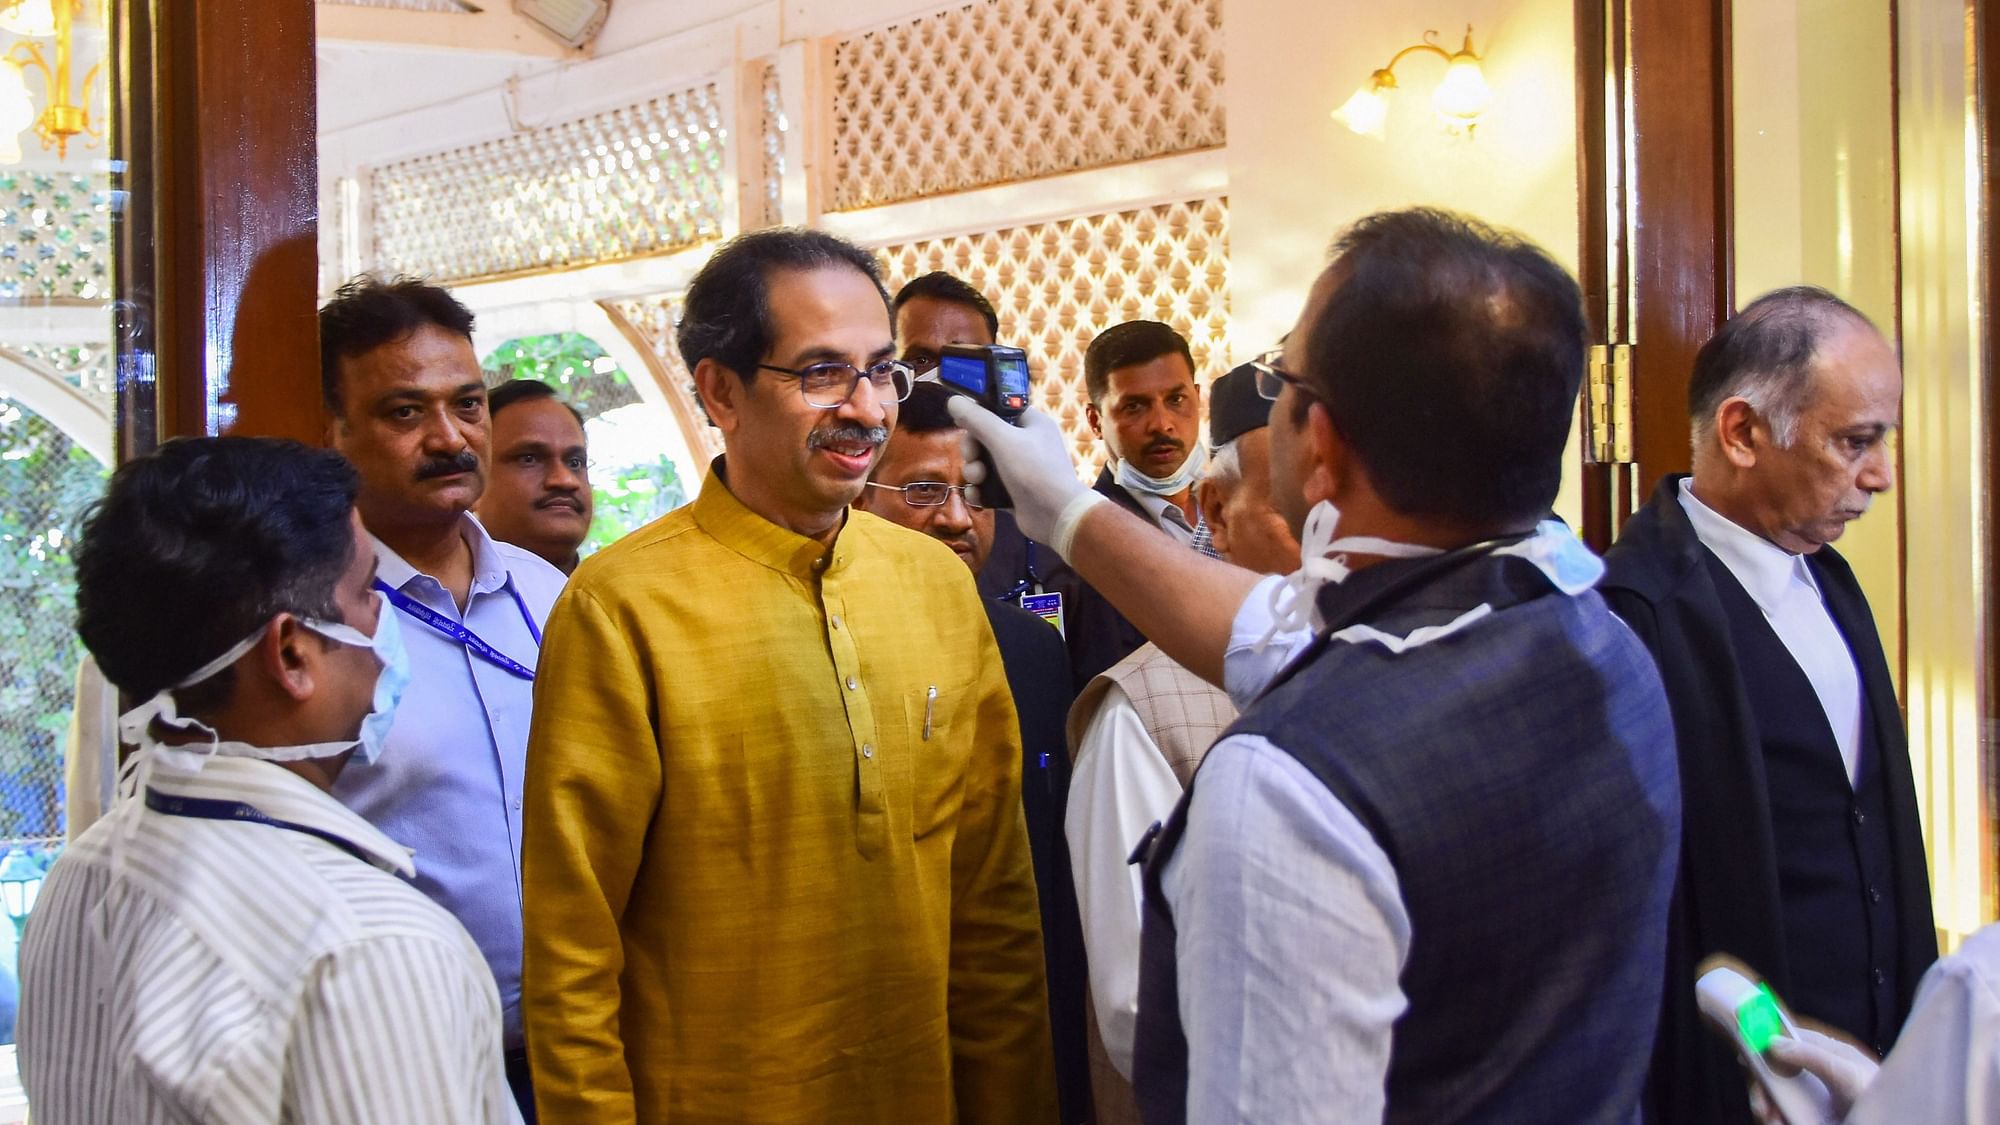 File Image: An official uses thermal screening device on Maharashtra Chief Minister Uddhav Thackeray, in wake of deadly coronavirus outbreak, as he arrives at Raj Bhavan in Mumbai, Friday, 20 March, 2020.